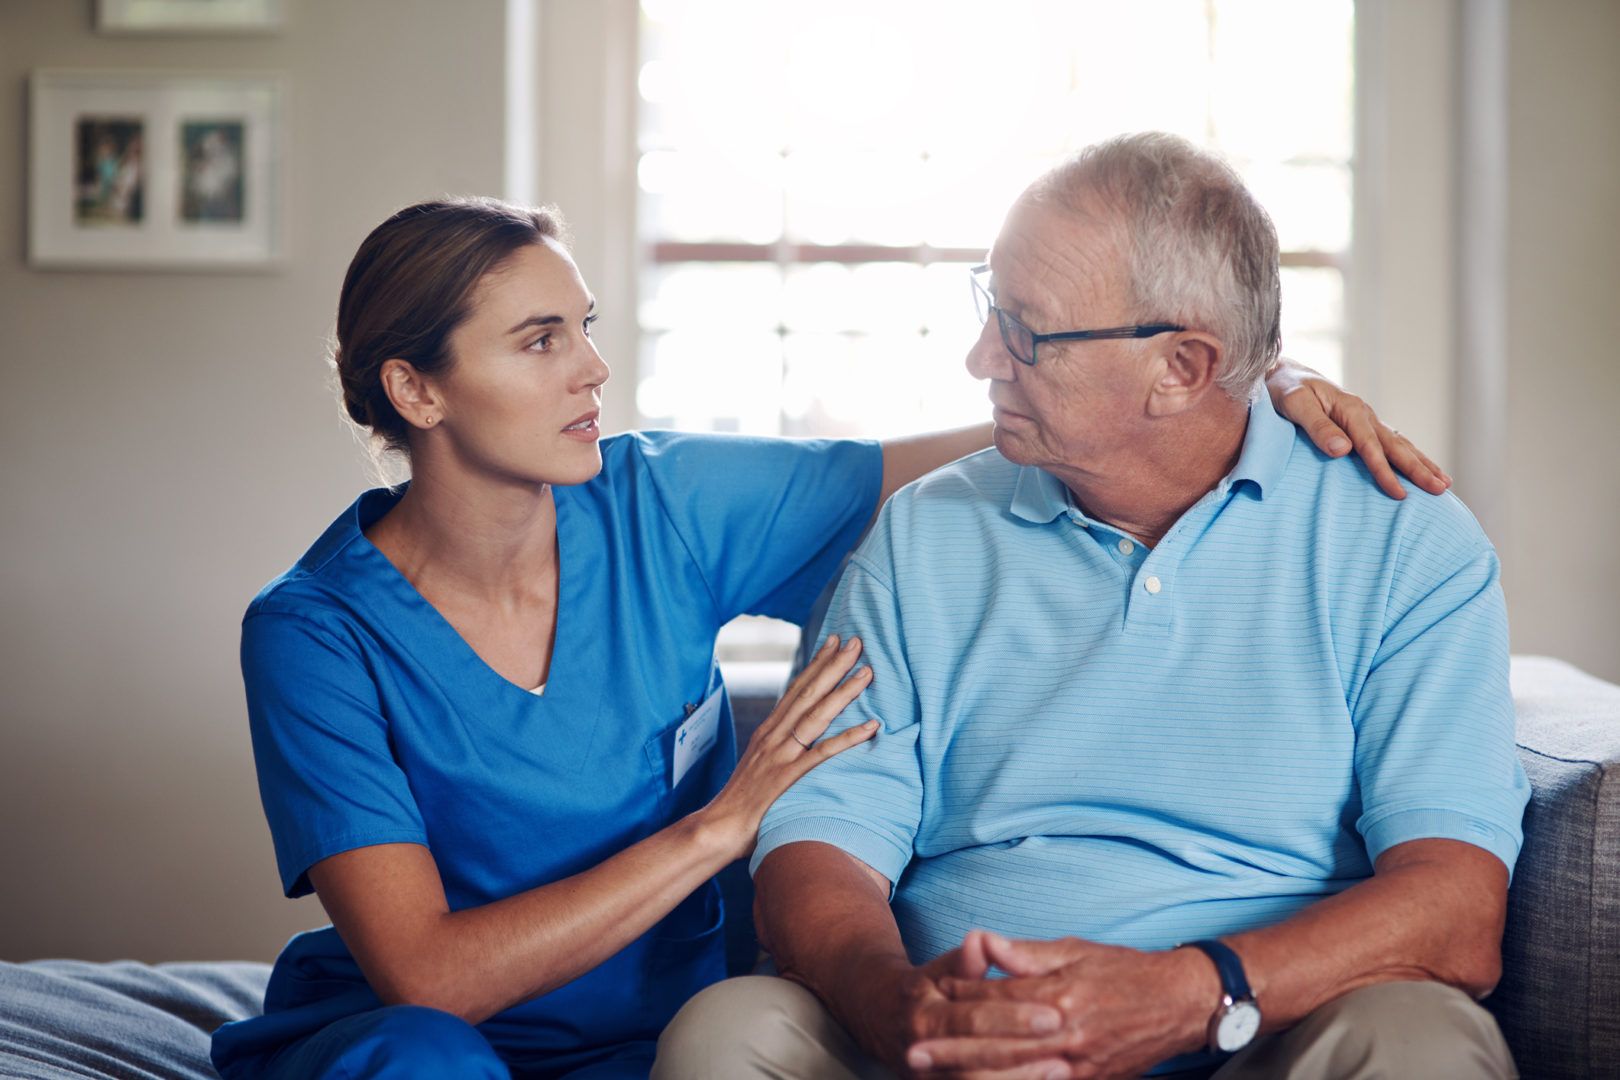 Checklist: Questions to ask when choosing a nursing home - Care.com ...